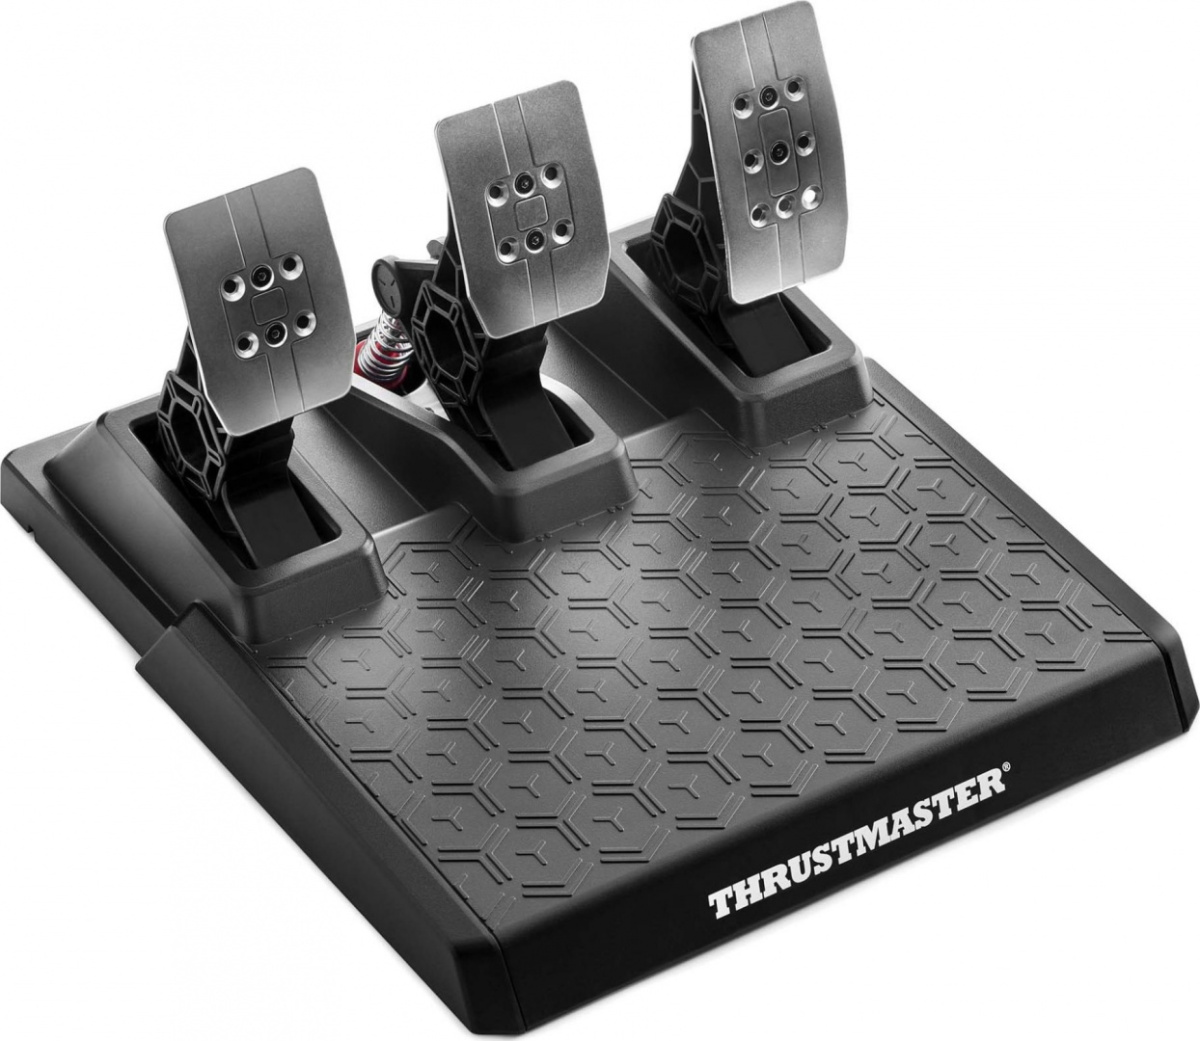 THRUSTMASTER T248 - OUTLET